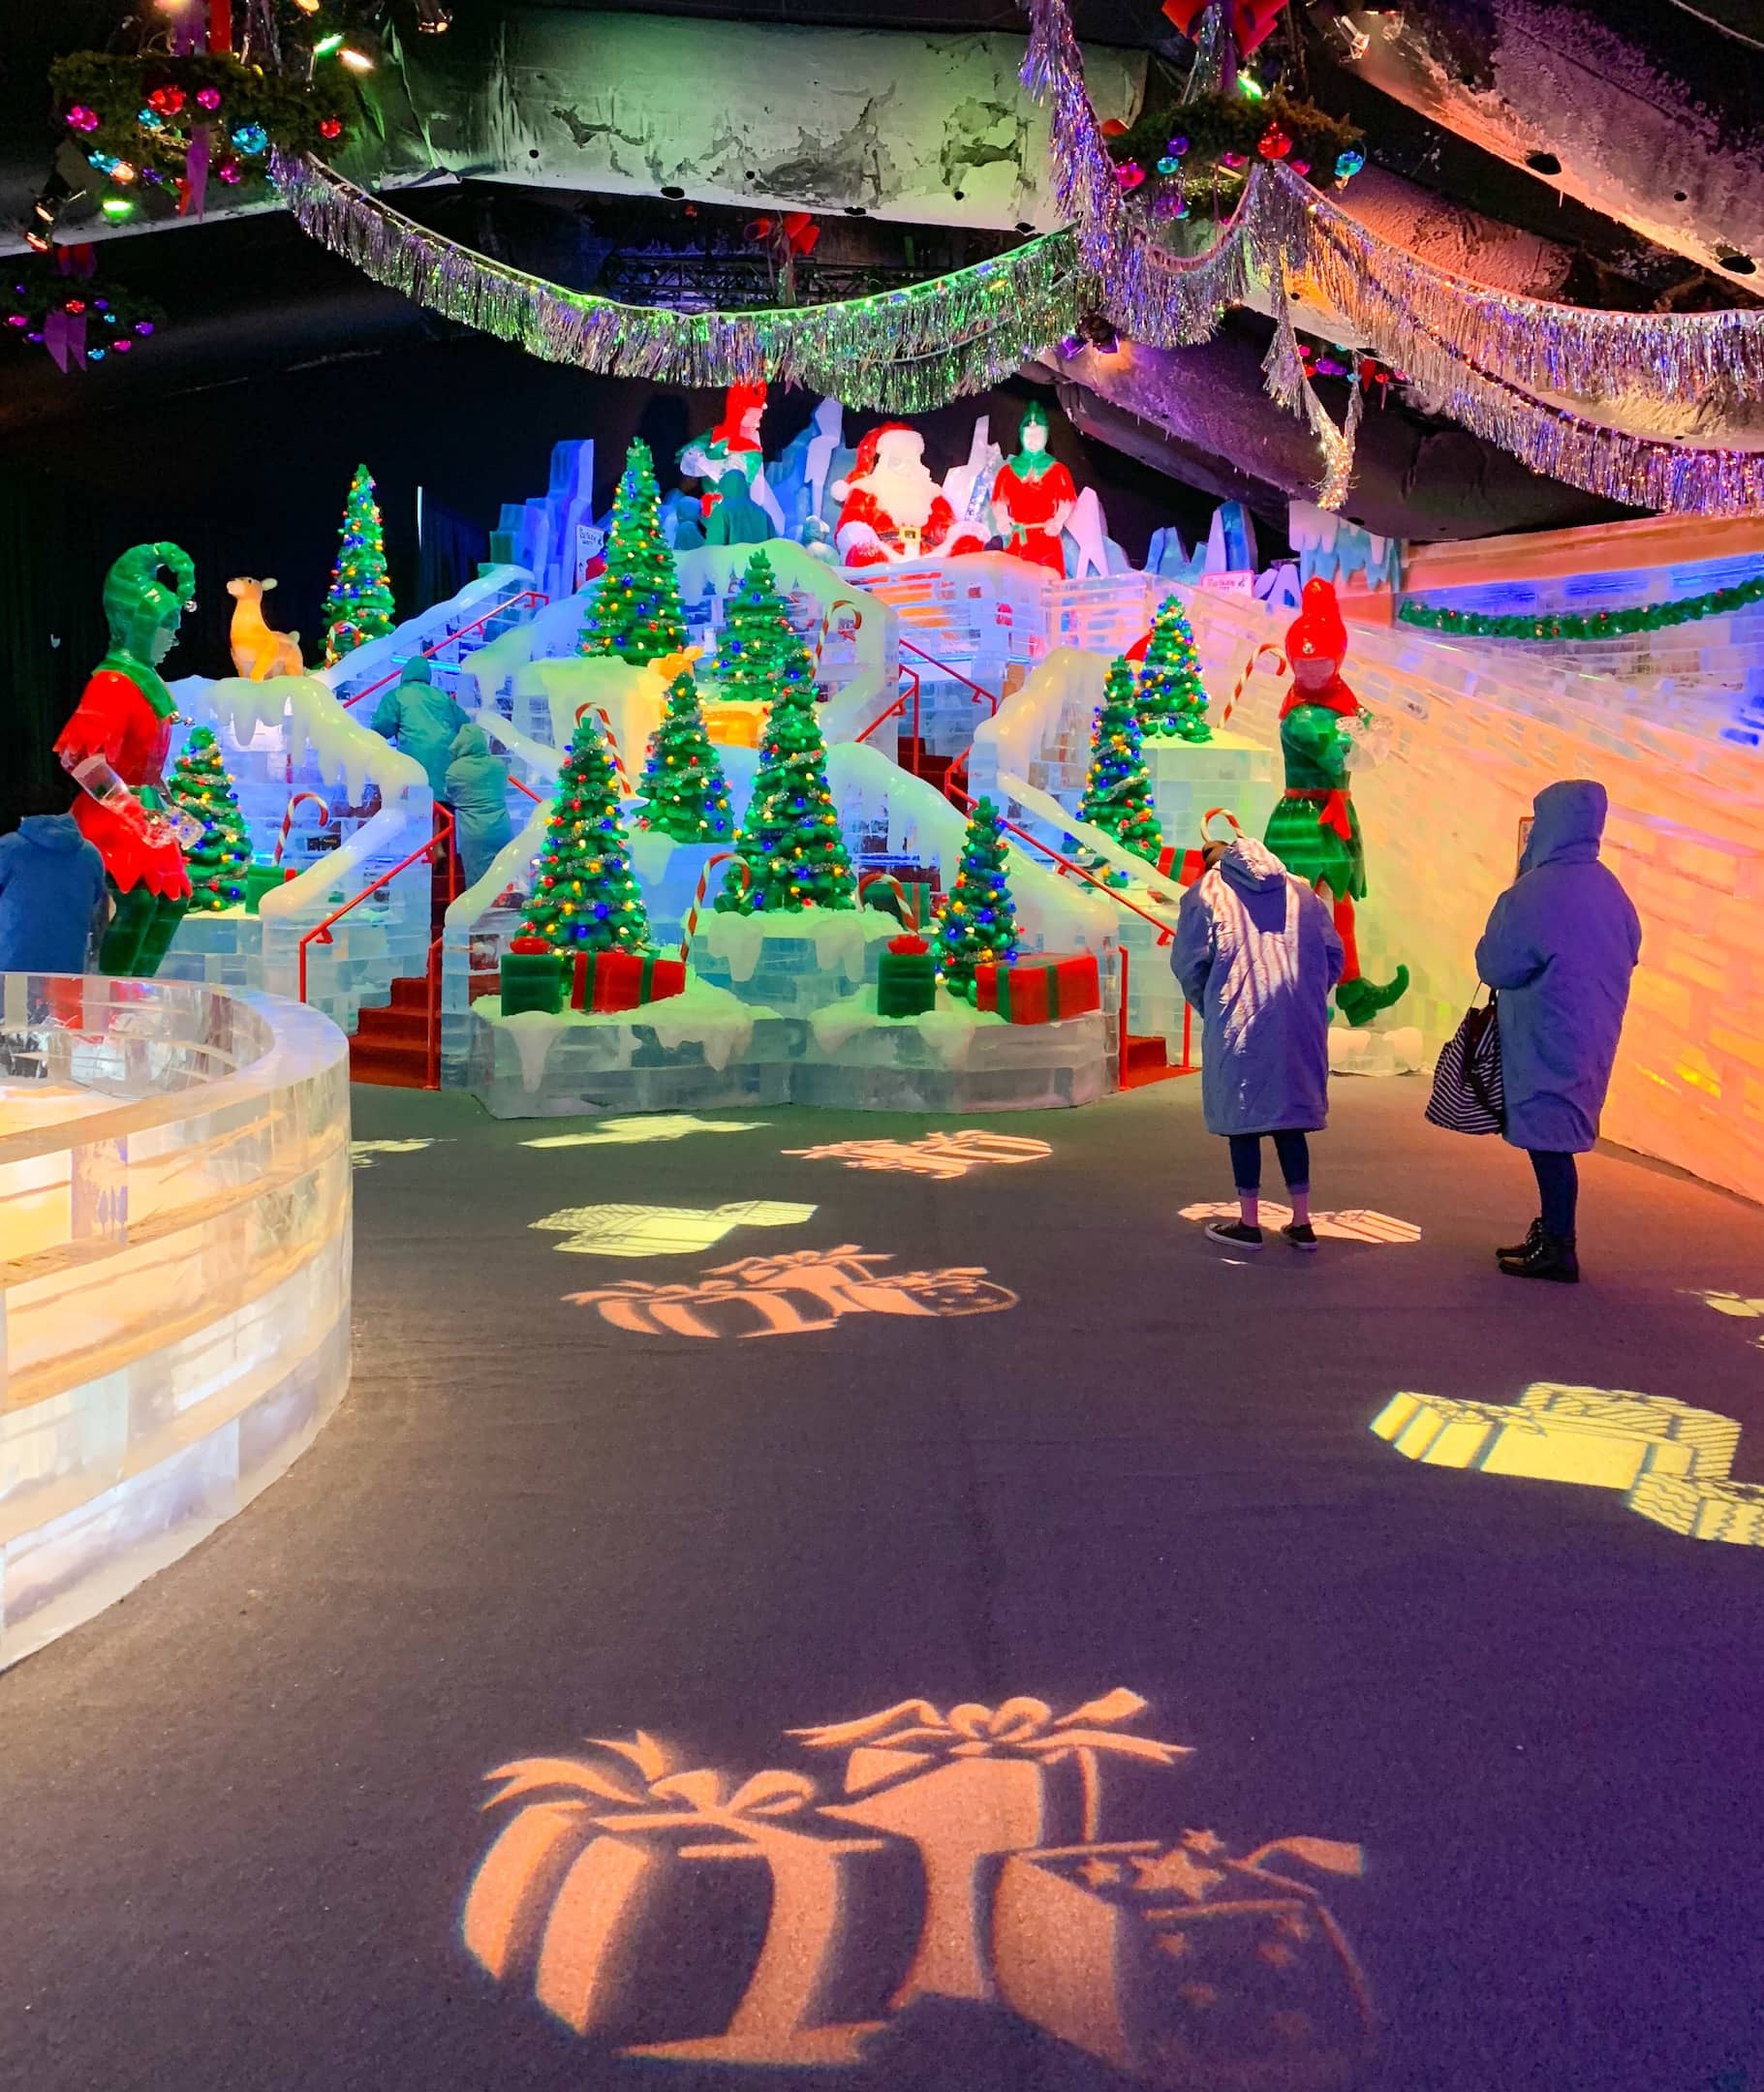 The Complete Guide To Christmas At Gaylord Palms While Ice Is Not My